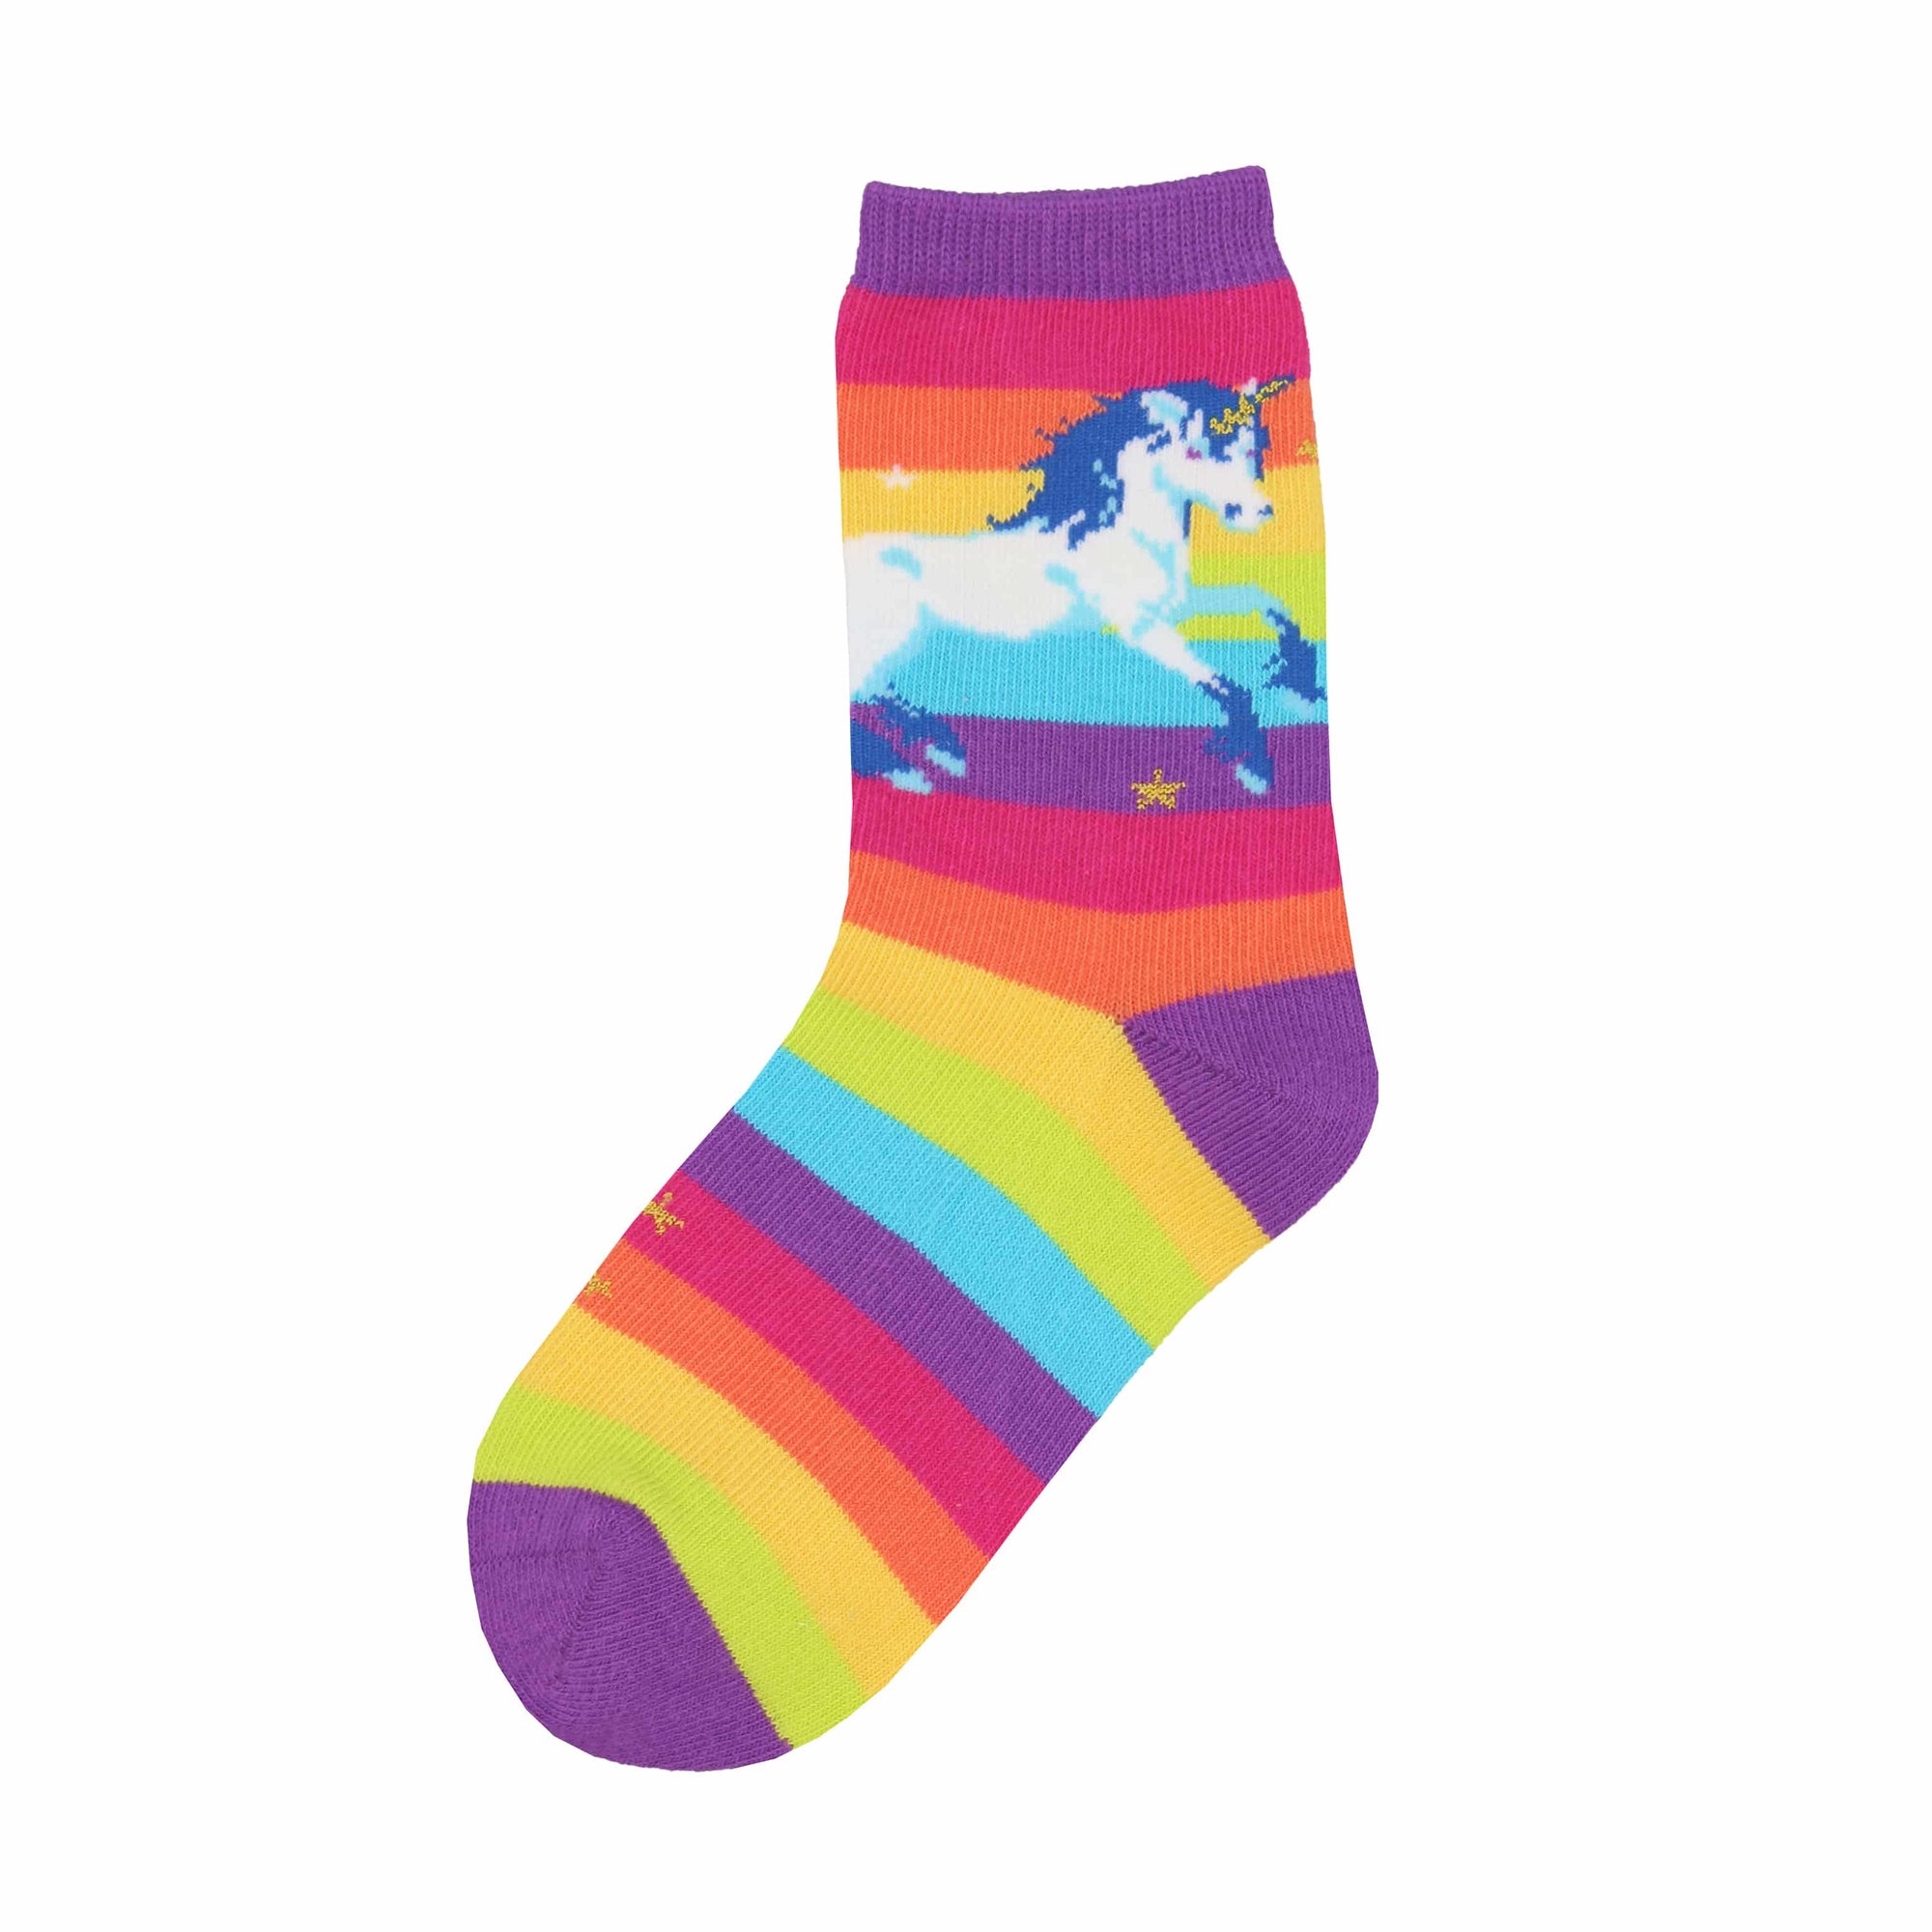 Make a little magic with these colorful kids' unicorn socks.